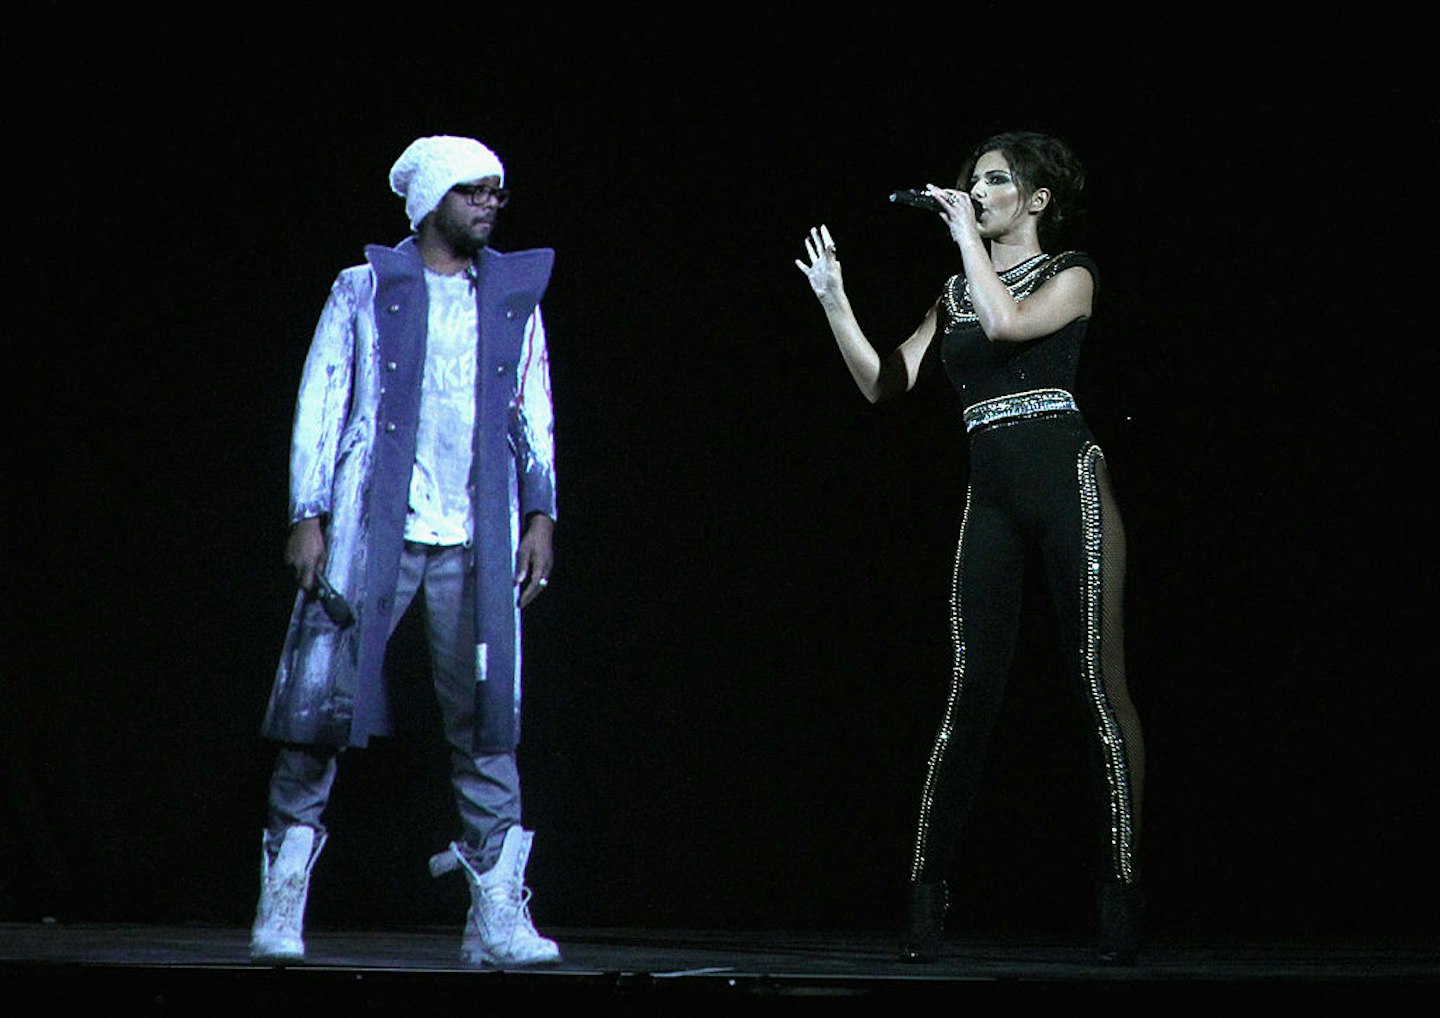 Cheryl featuring Will.i.am - 3 words